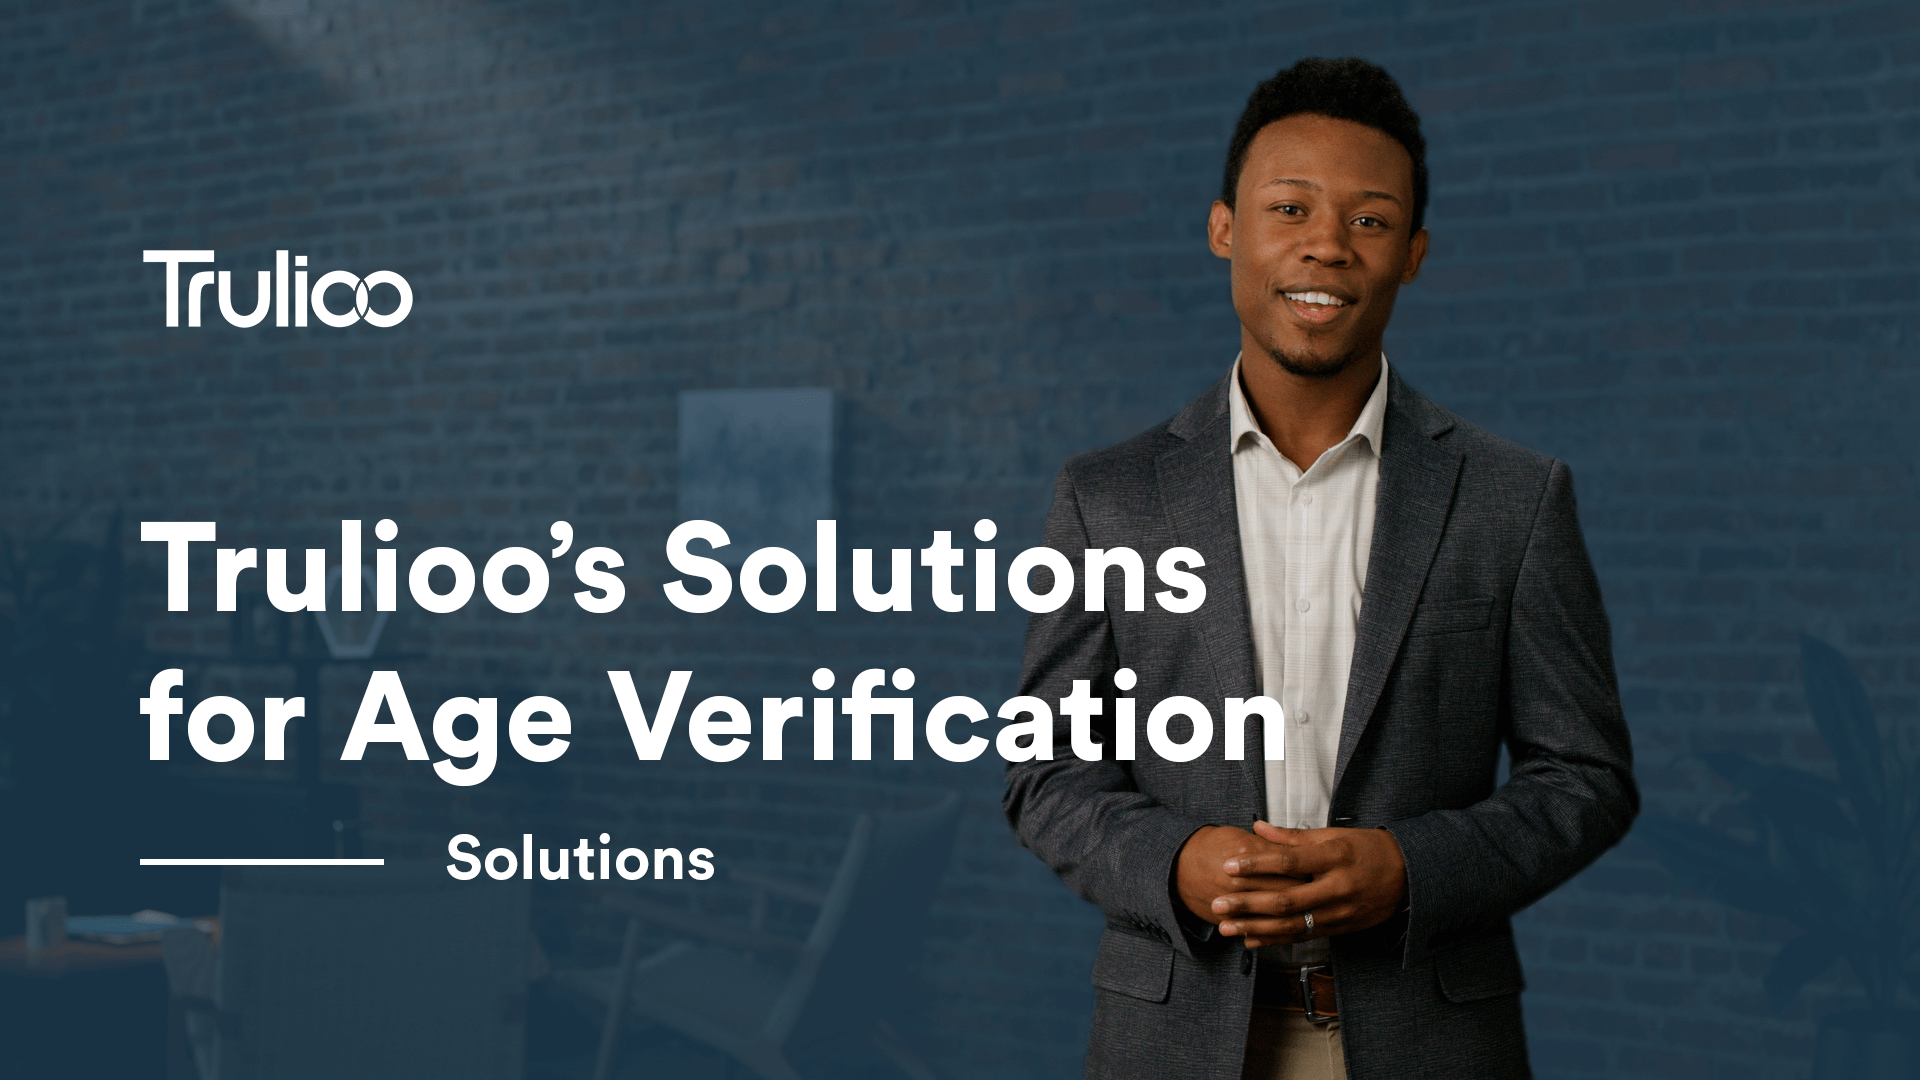 Trulioo’s Solutions for Age Verification